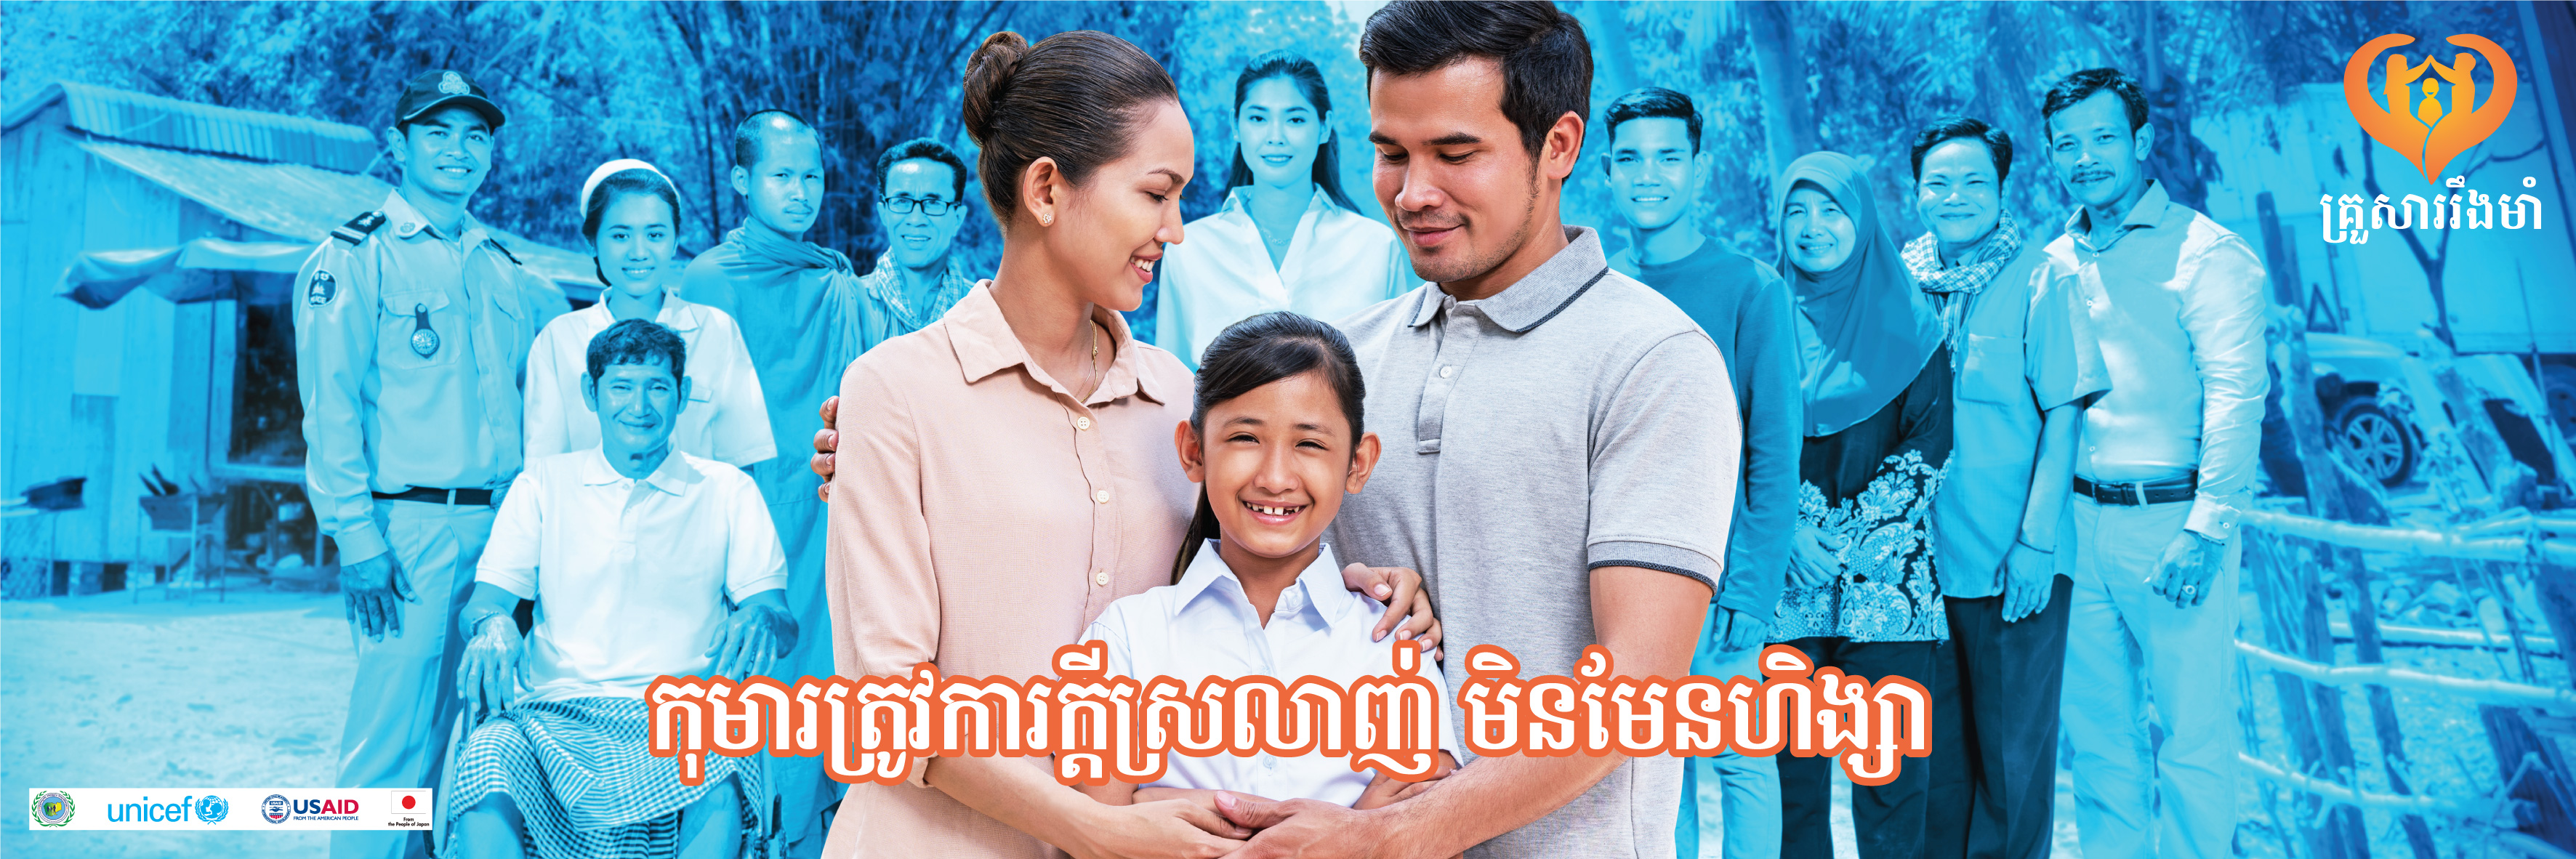 https://strongfamily.mosvy.gov.kh/wp-content/uploads/2019/09/Campaign-Banner-3x1m-FA_Banner-3x1m.jpg